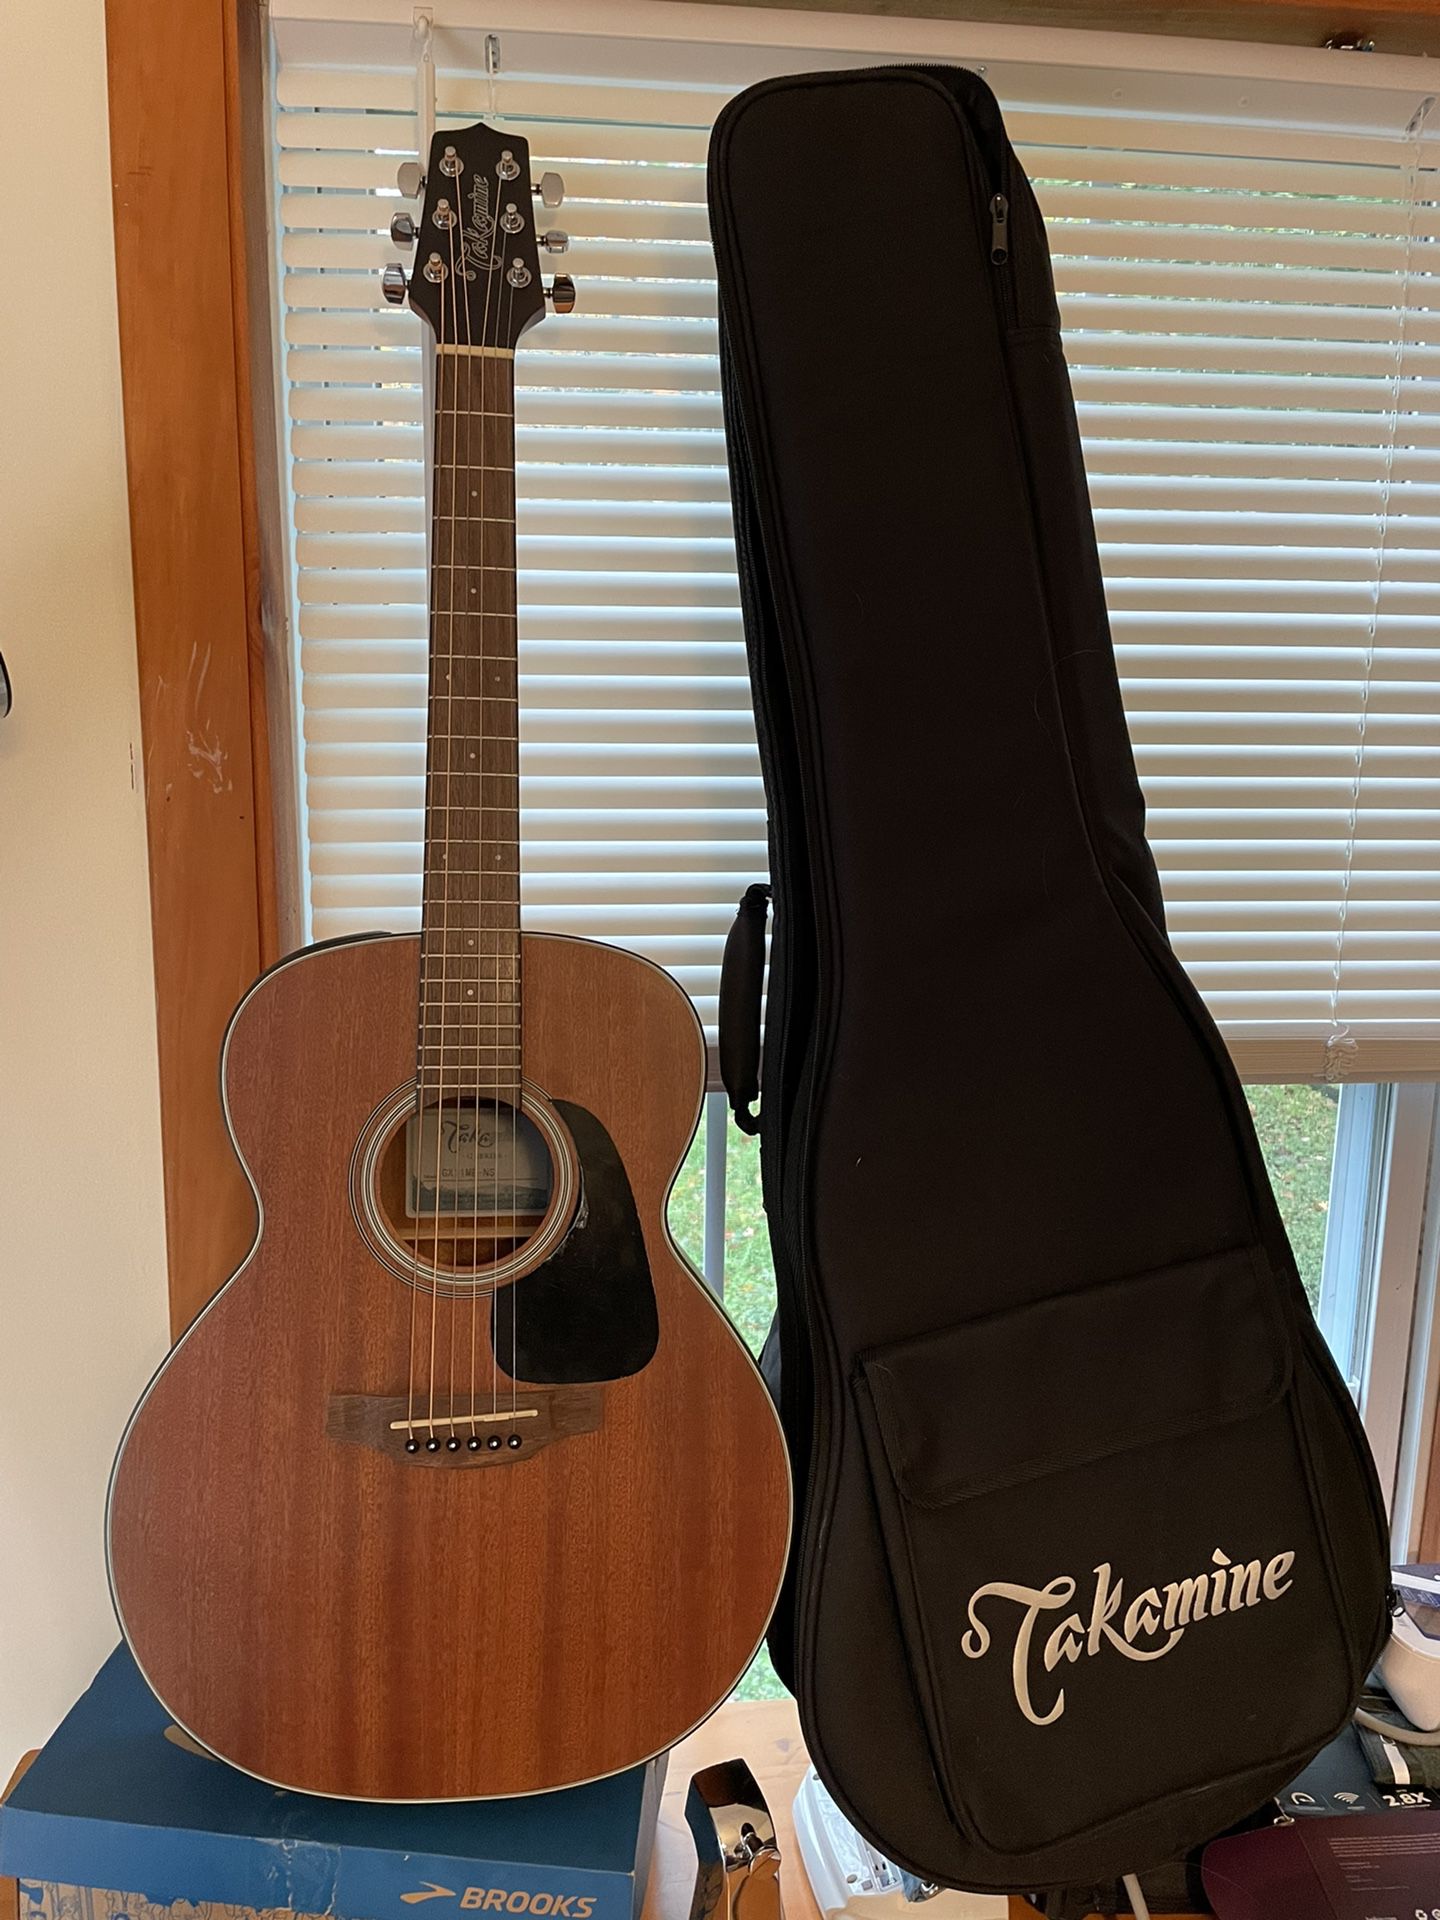 Takamine Price Reduced To 125.00